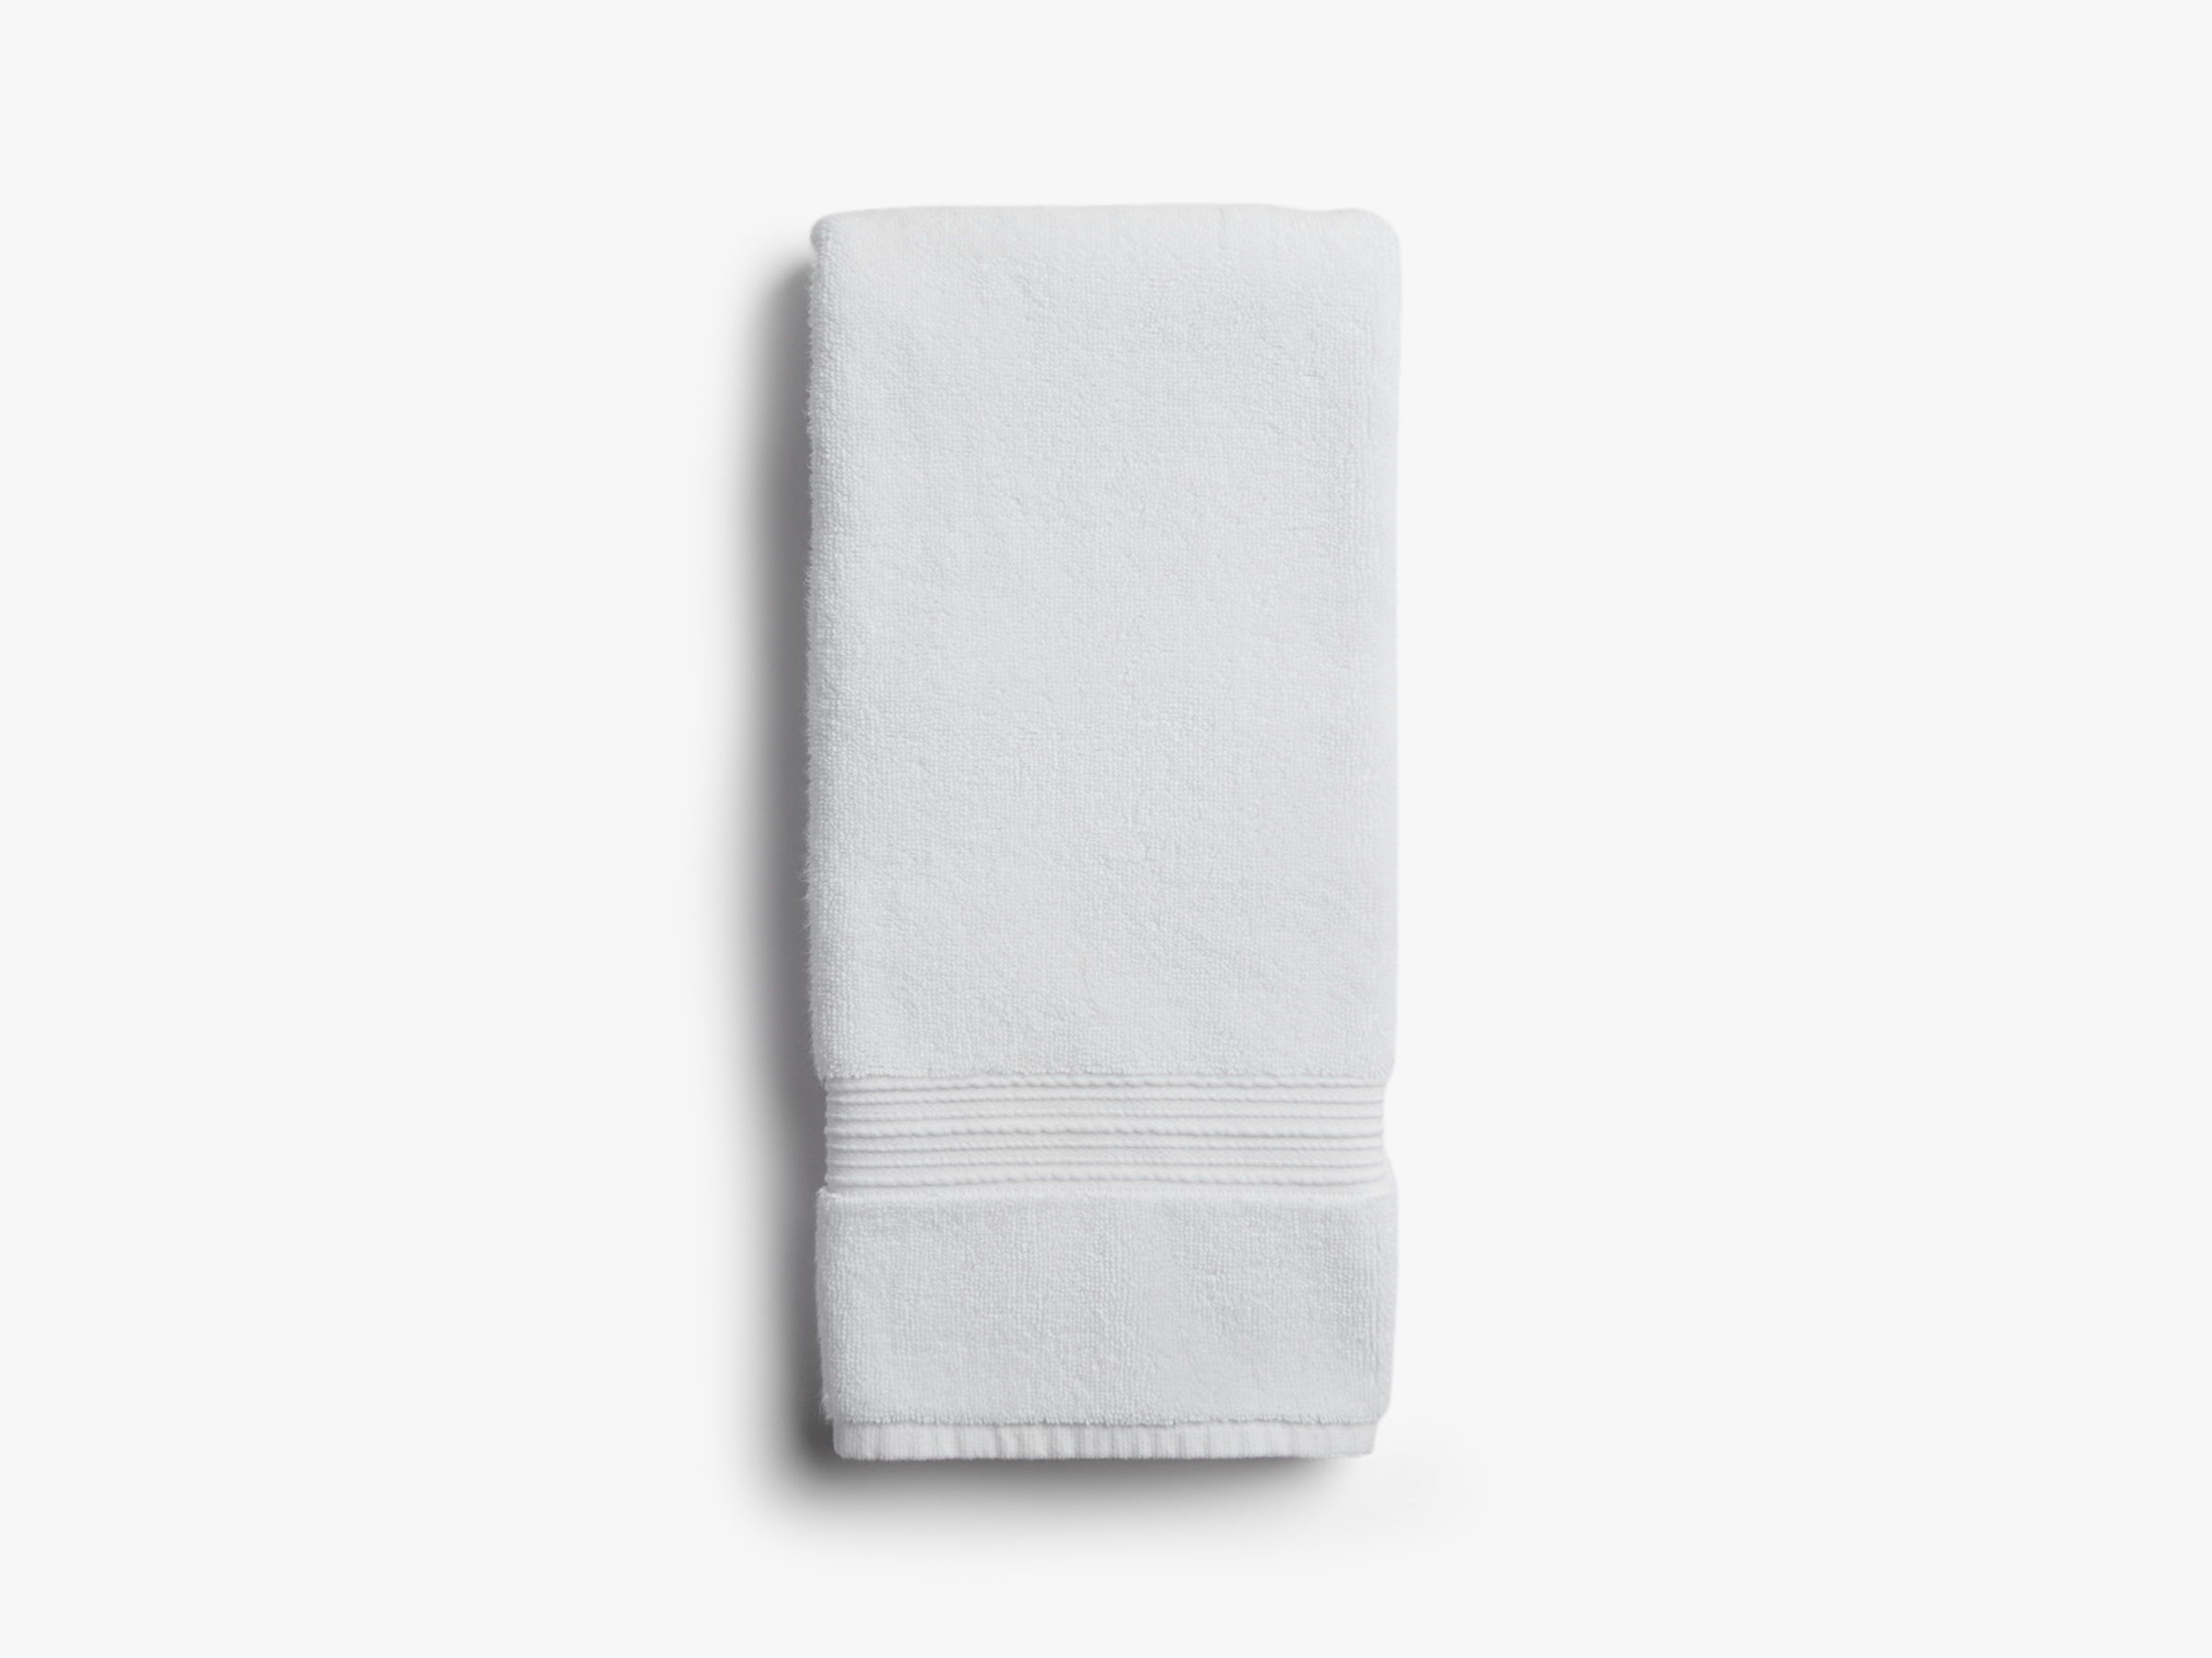 Parachute Turkish Cotton Waffle Hand Towel in White